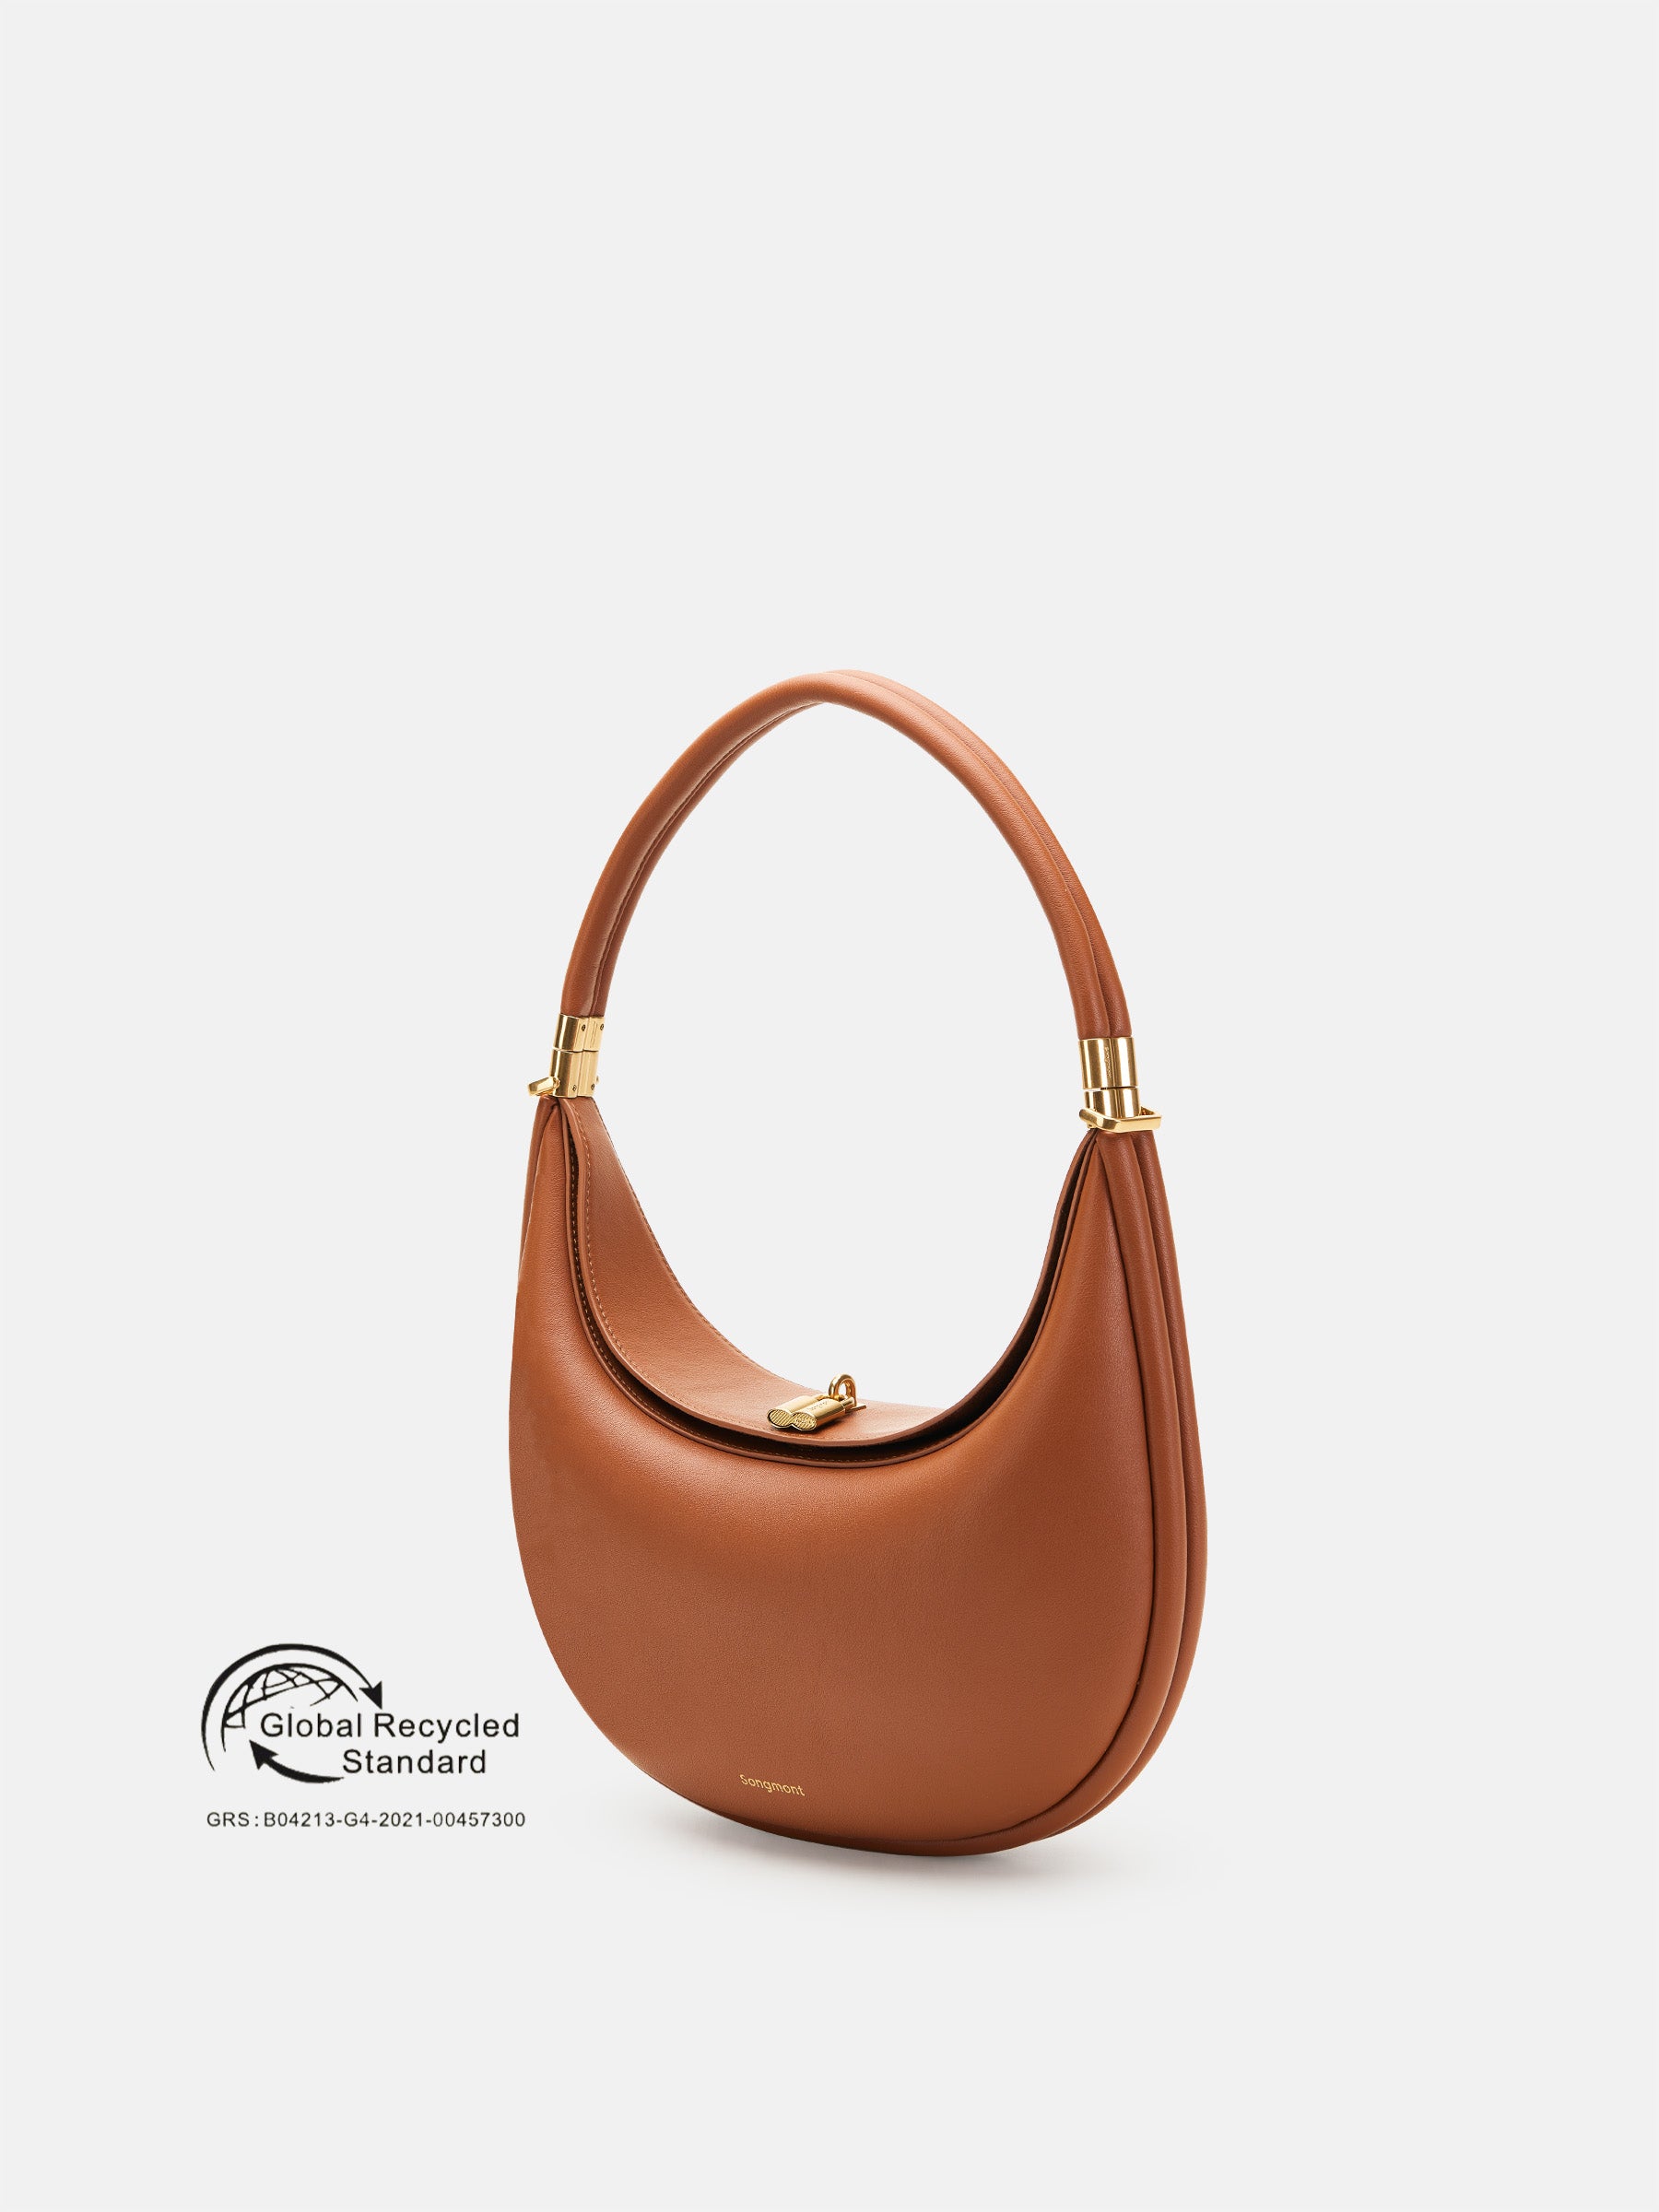 Luna Bag - recycled leather